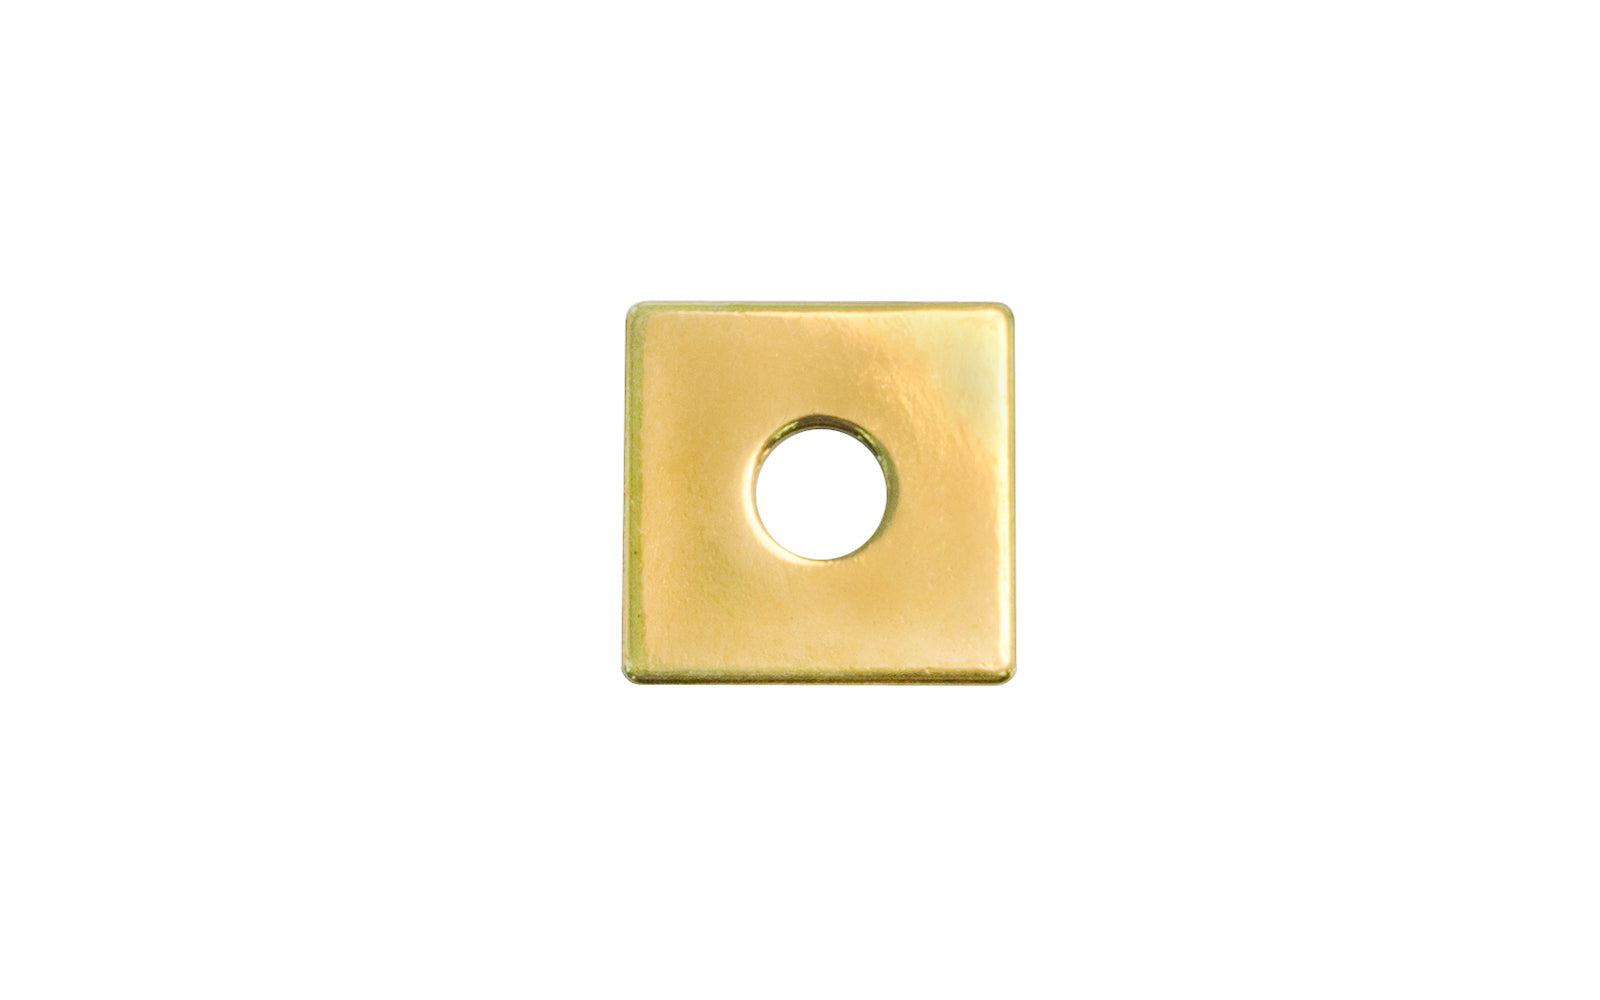  A simple square solid brass backplate designed in the Mission / Arts & Crafts style. The square-shaped rosette backplate is great for knobs. Made of heavy stamped brass material. Sold as one each. Solid Brass Mission-Style Square Backplate for Knobs. 3/4" x 3/4" size. Square shape back plate for knobs